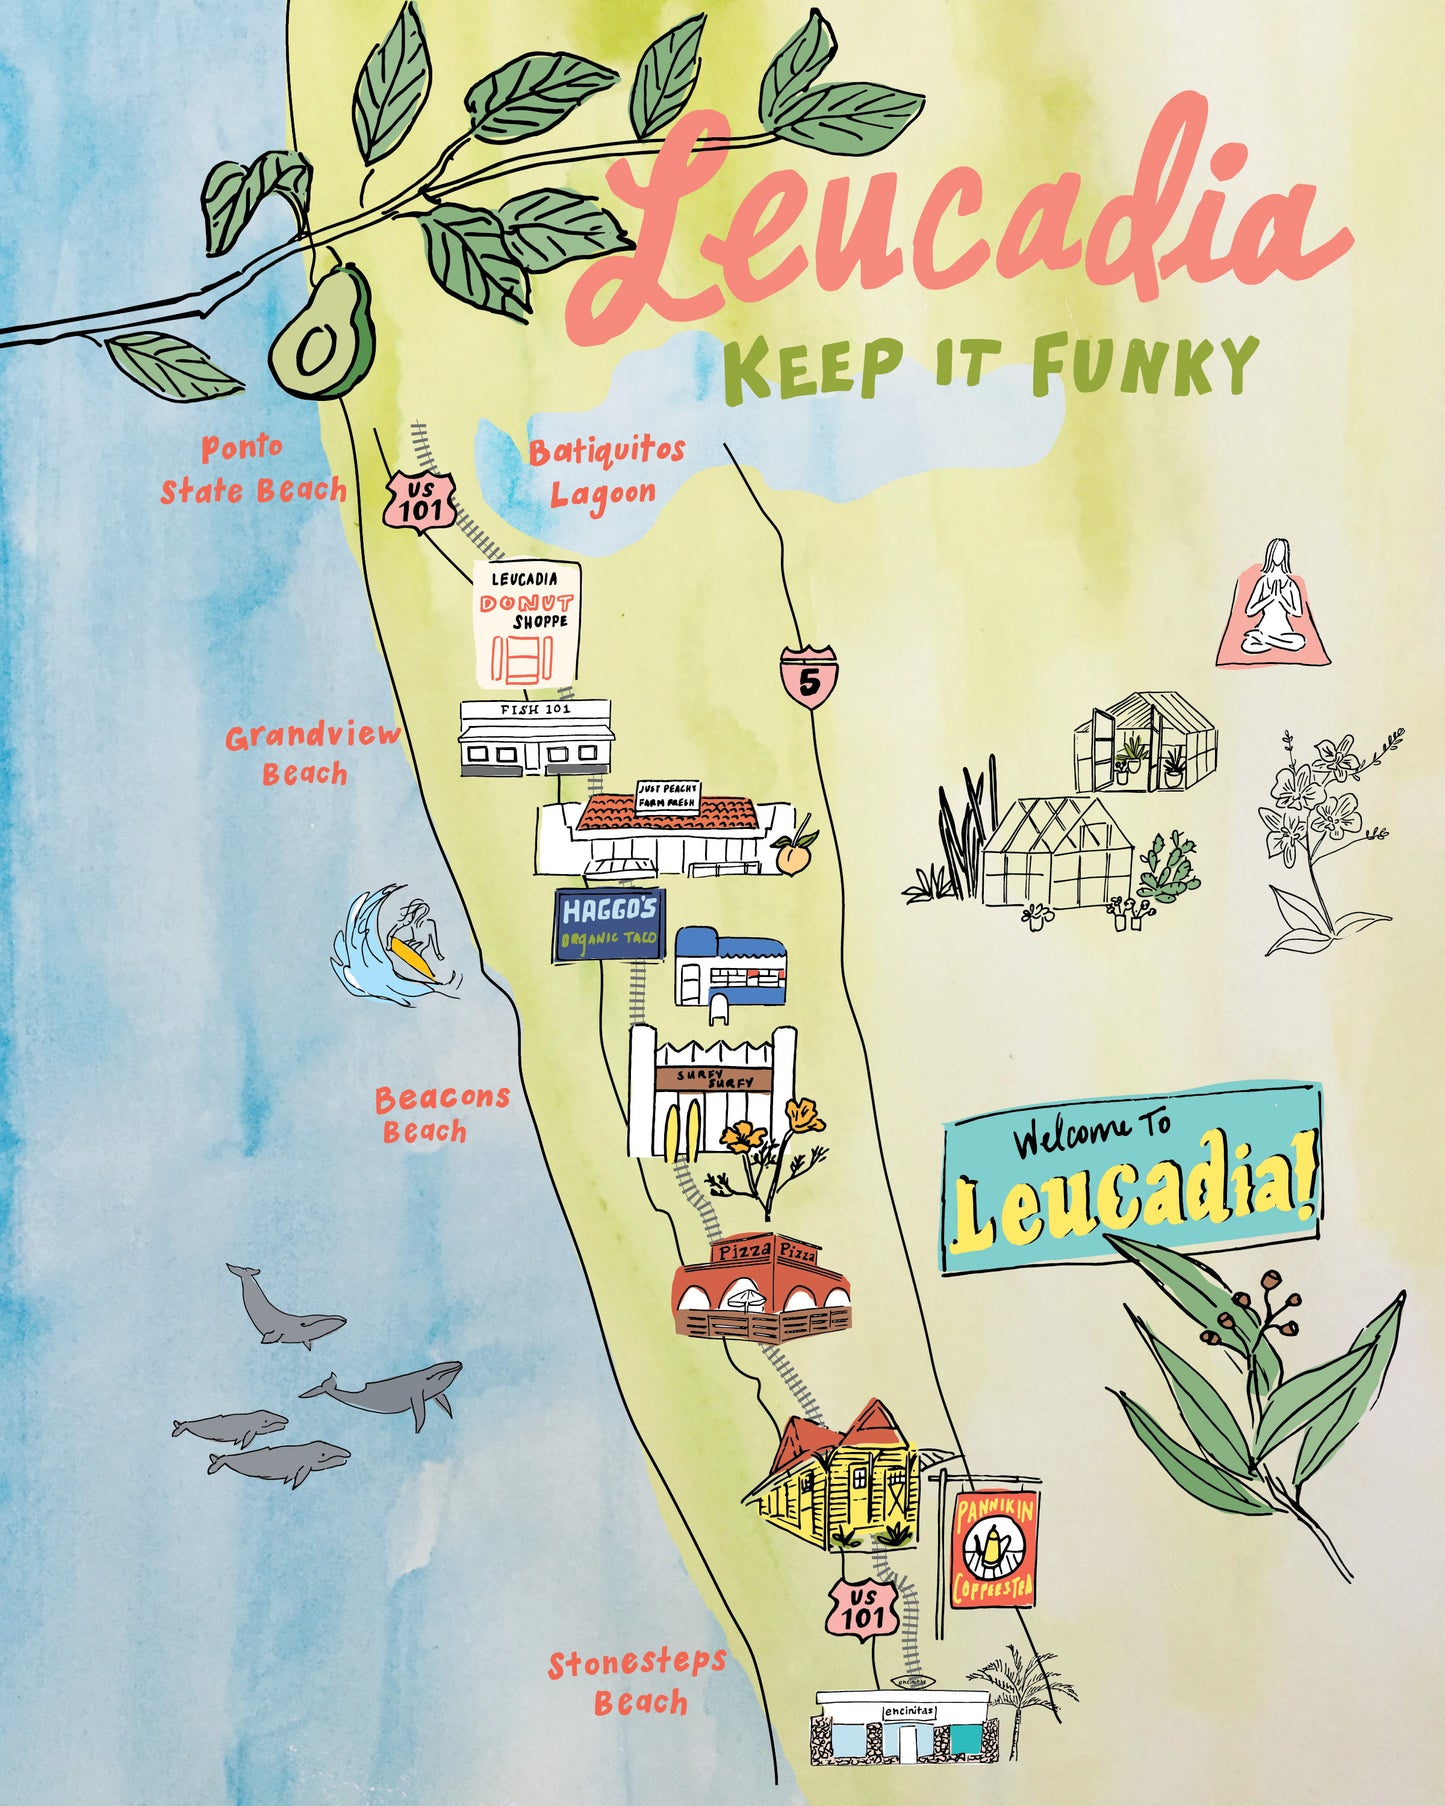 Hand drawn and water-colored map of Leucadia by Odd Daughter for Thread Spun